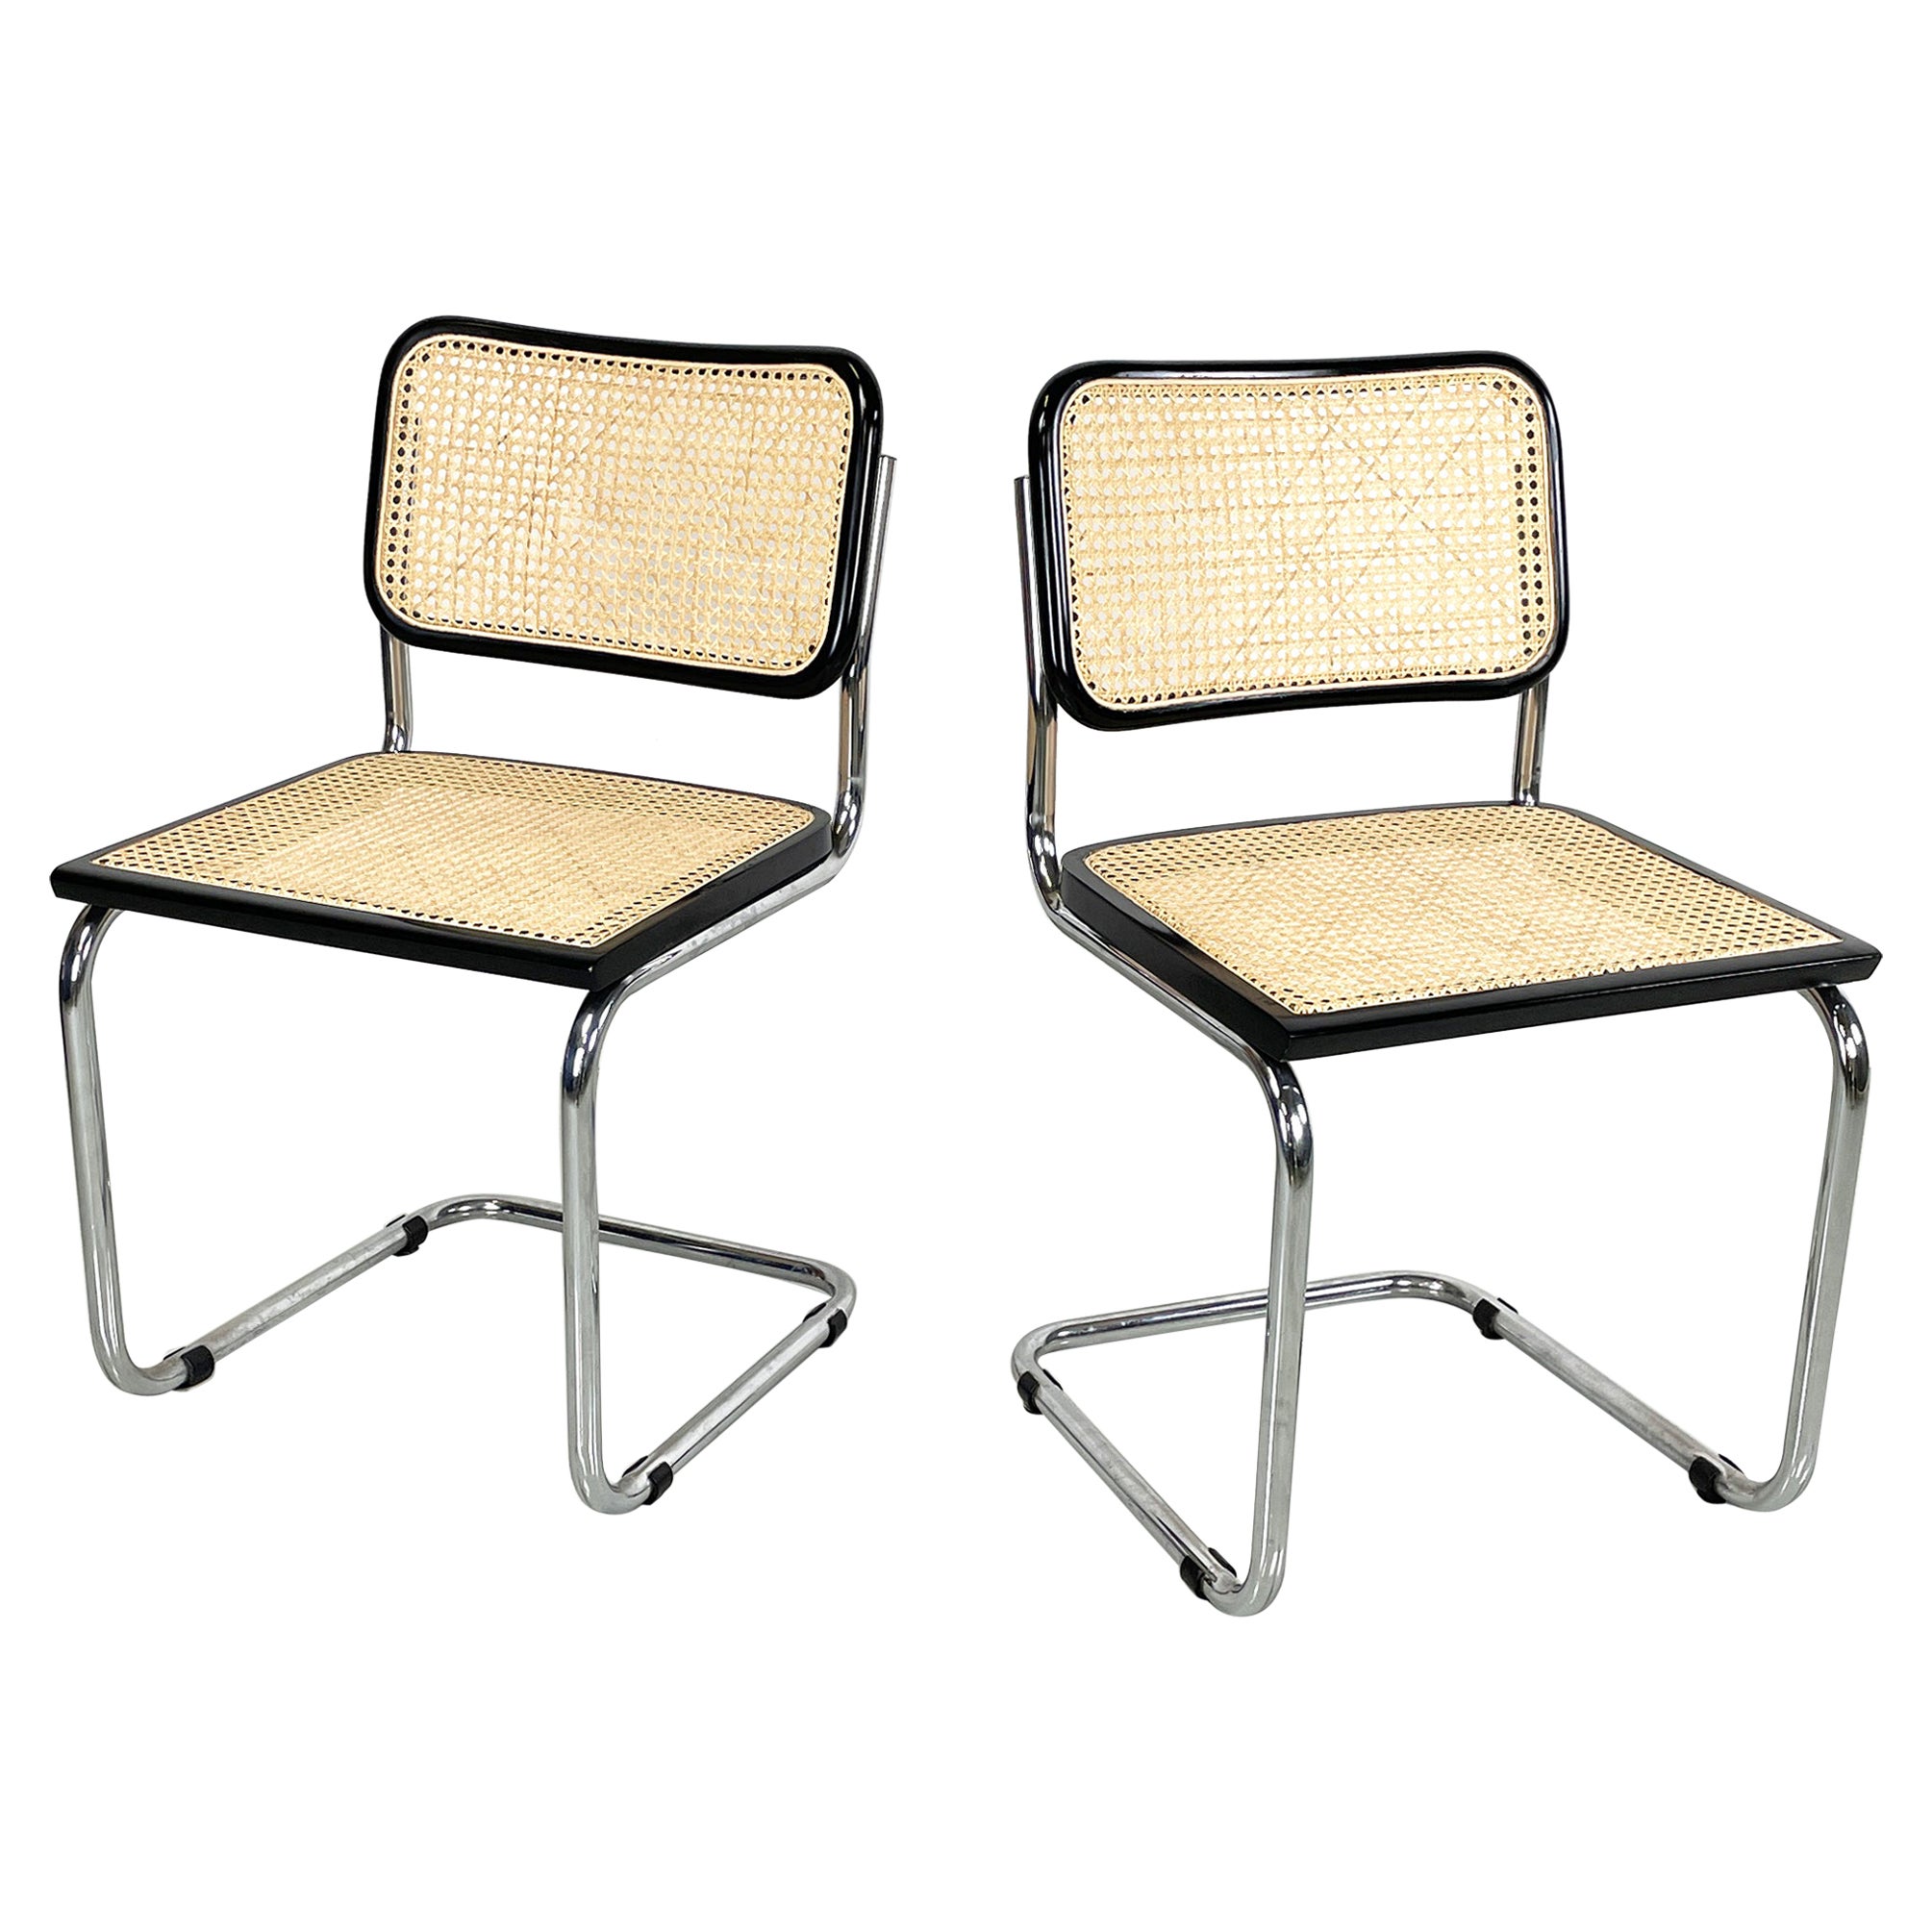 Italian mid-century modern Chairs in straw, black wood and steel, 1960s